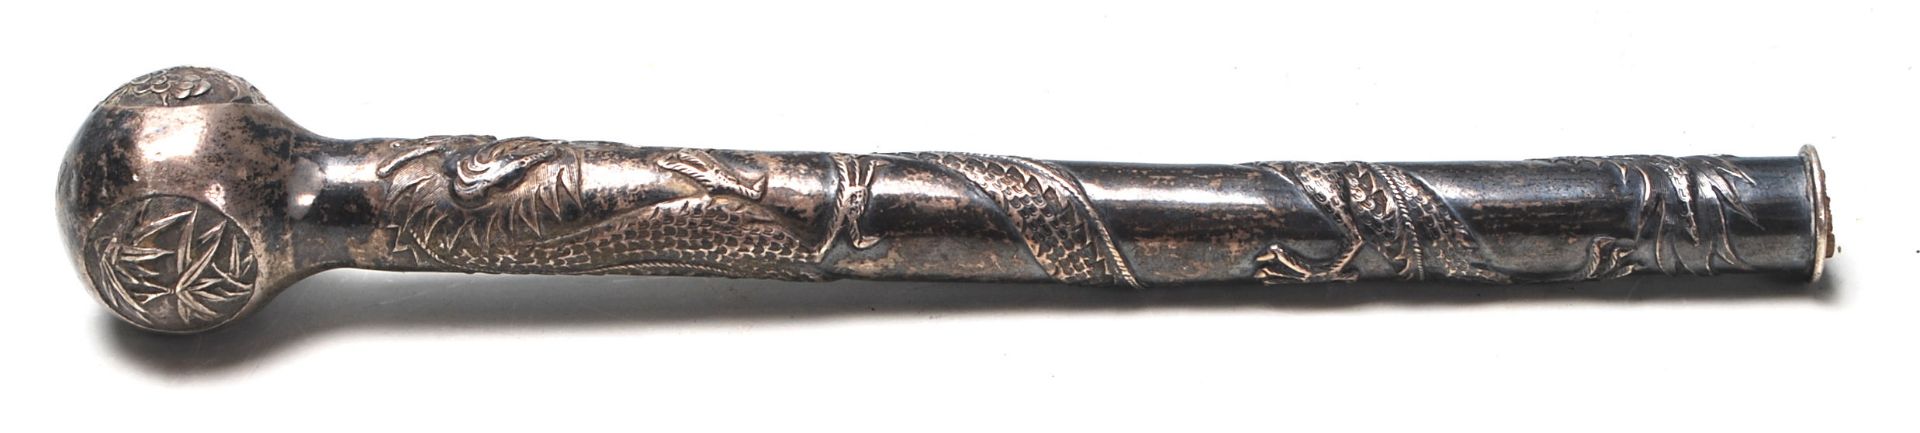 A late 19th / early 20th Century antique walking stick handle having raised Chinese dragon